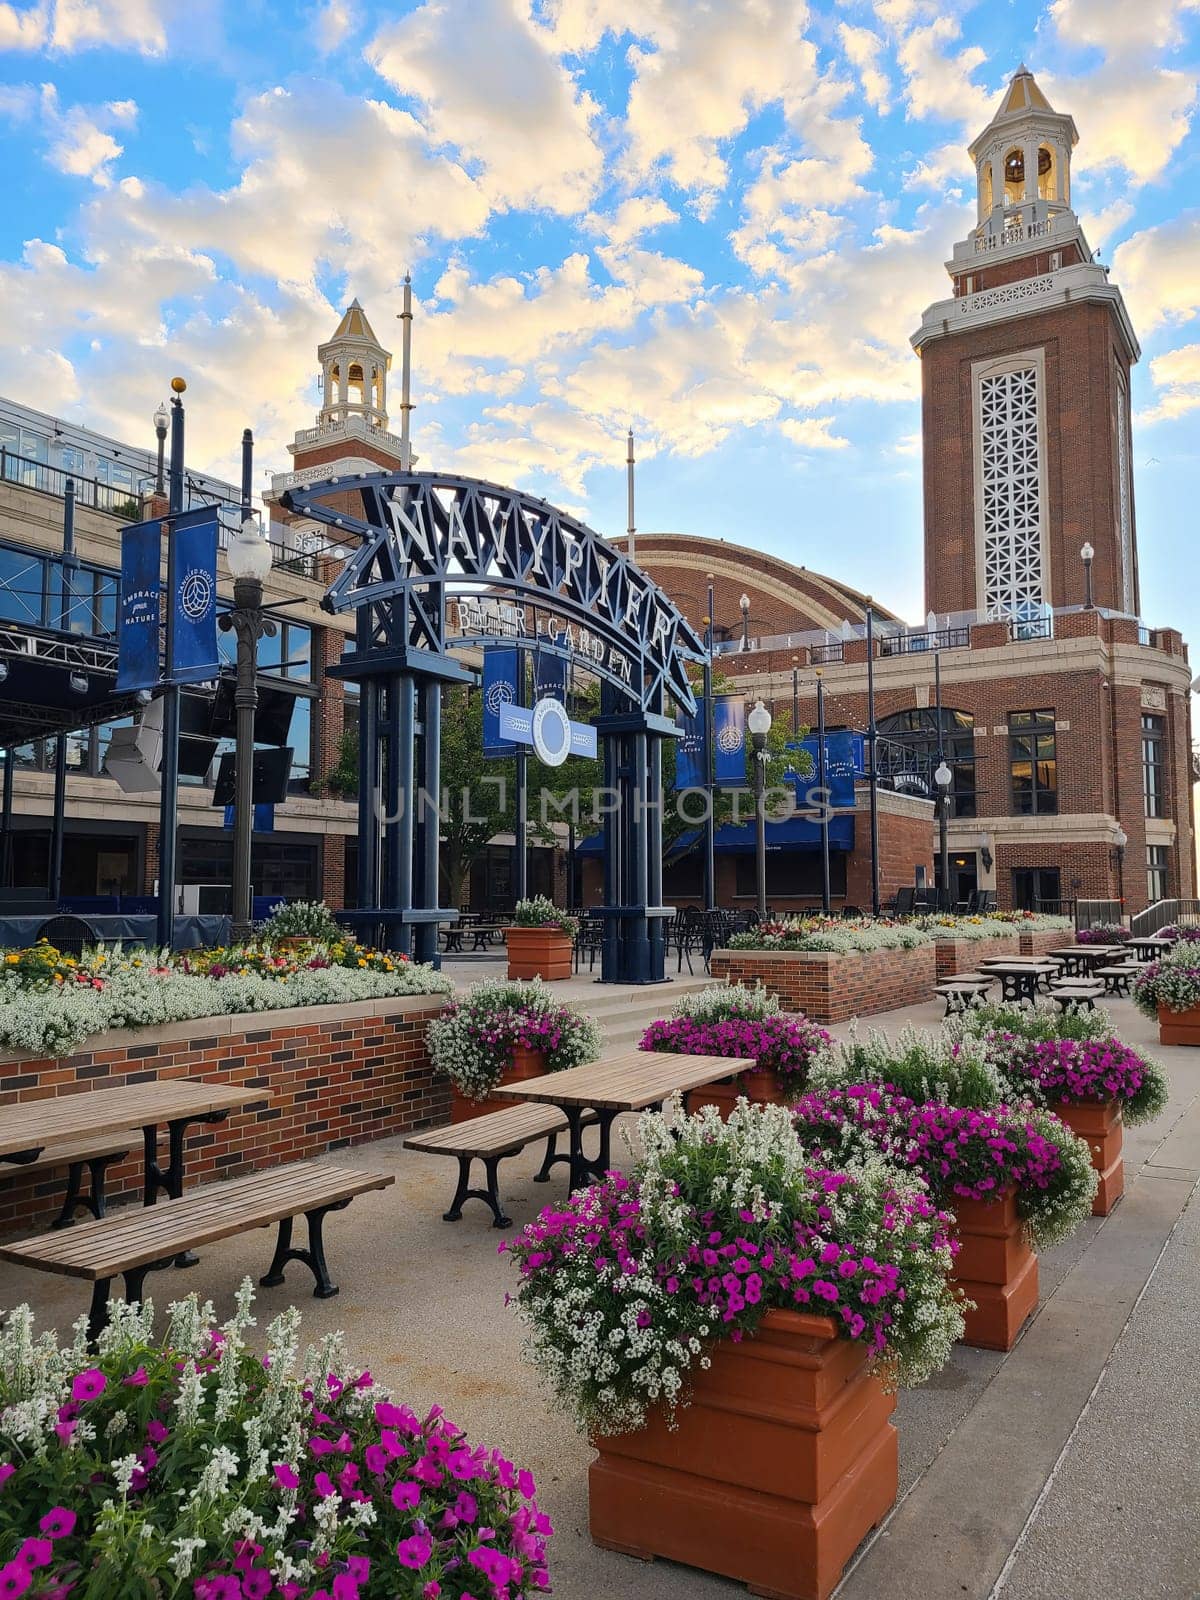 Colorful flower-filled planters at a leisurely outdoor dining area, with the historic architecture of Navy Pier, Chicago in the background on a clear day in 2022